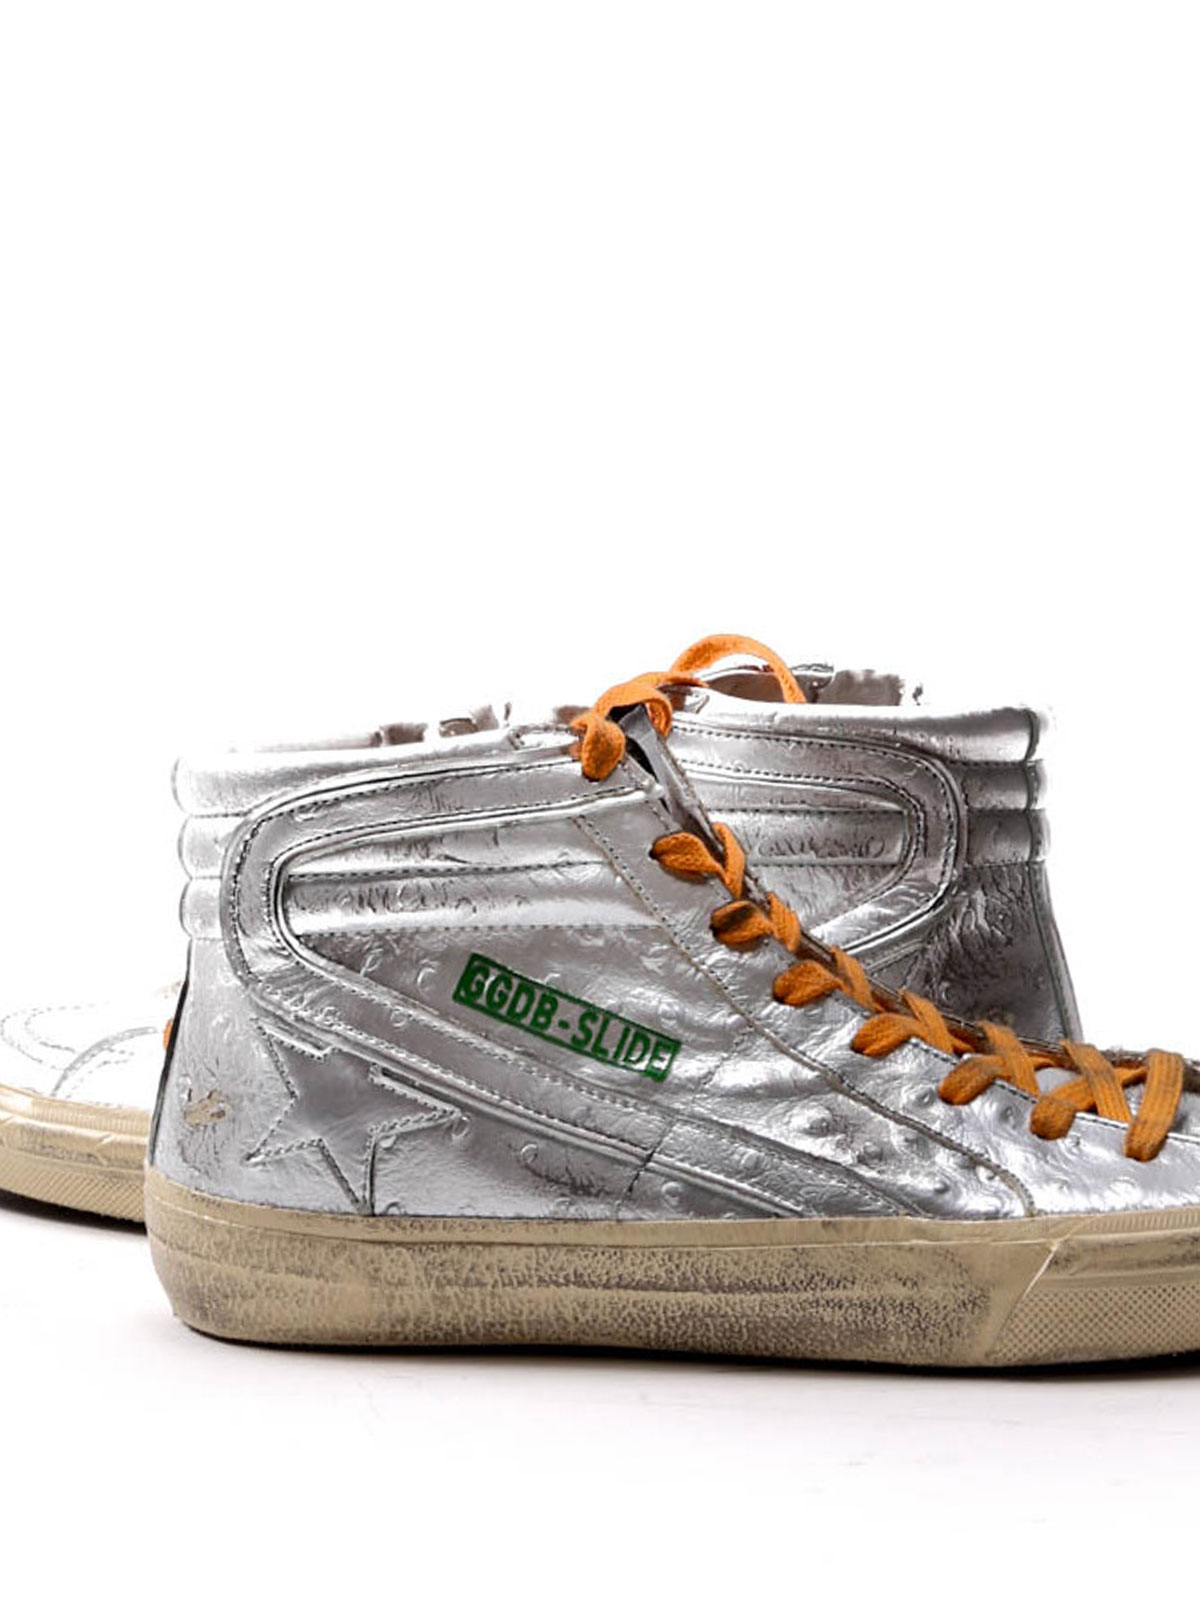 golden goose limited edition sneakers